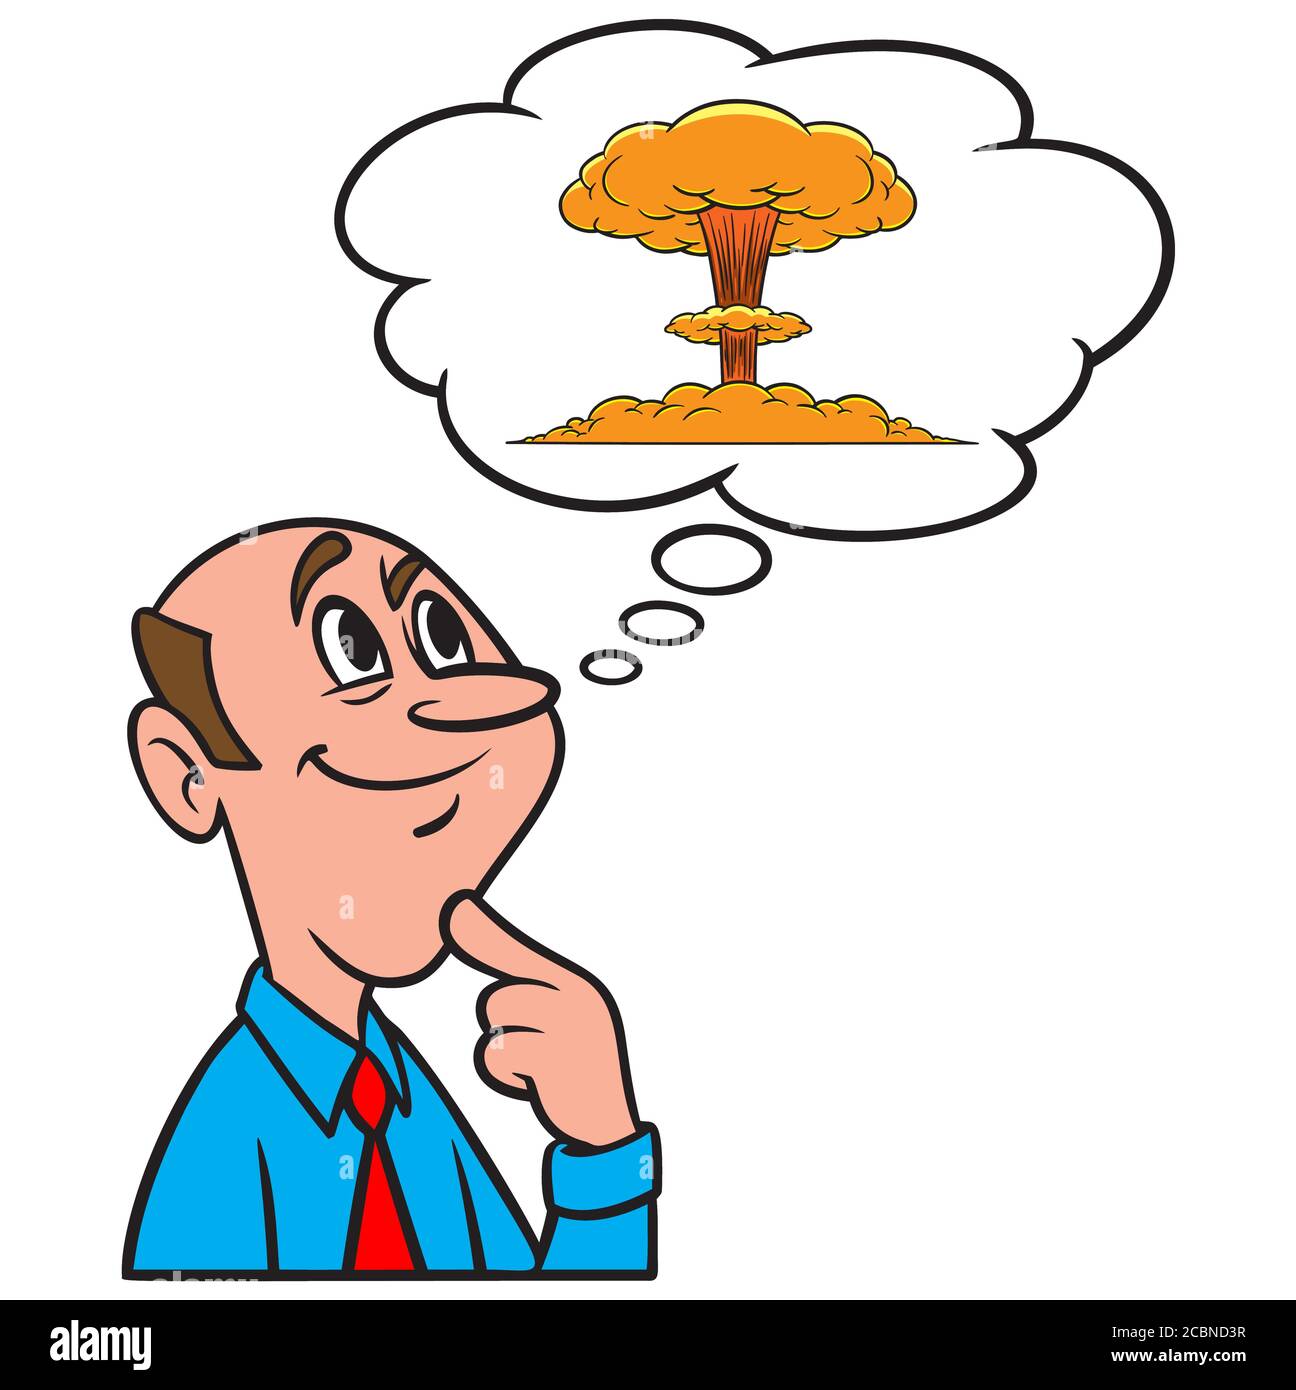 Thinking About War- An Illustration of a Person Thinking About War. Stock Vector